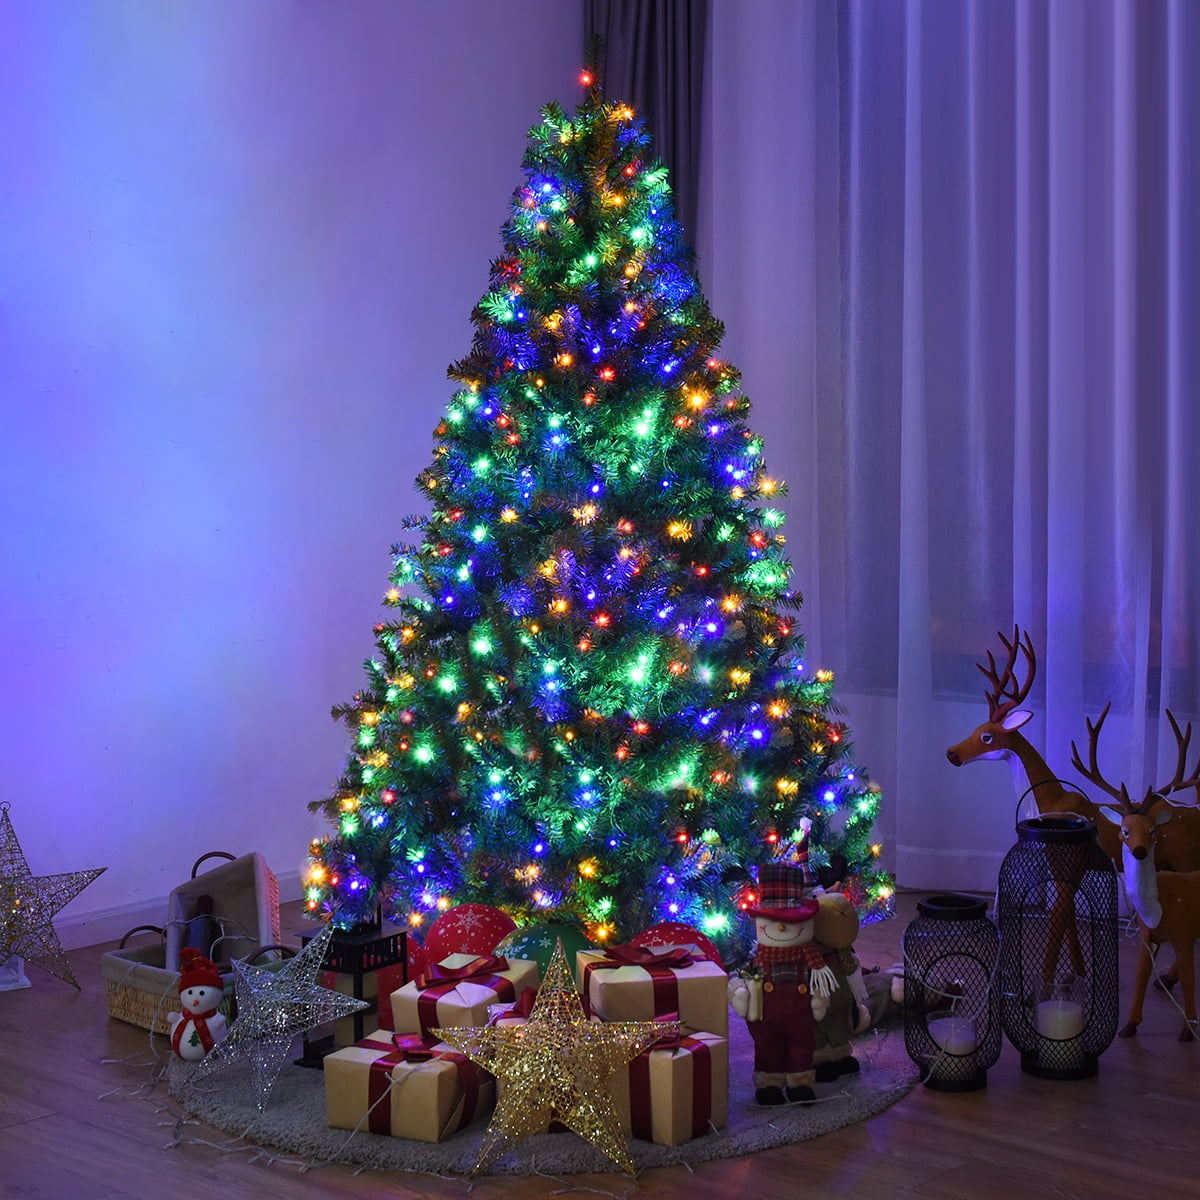 Lighted Christmas Tree - Photos All Recommendation